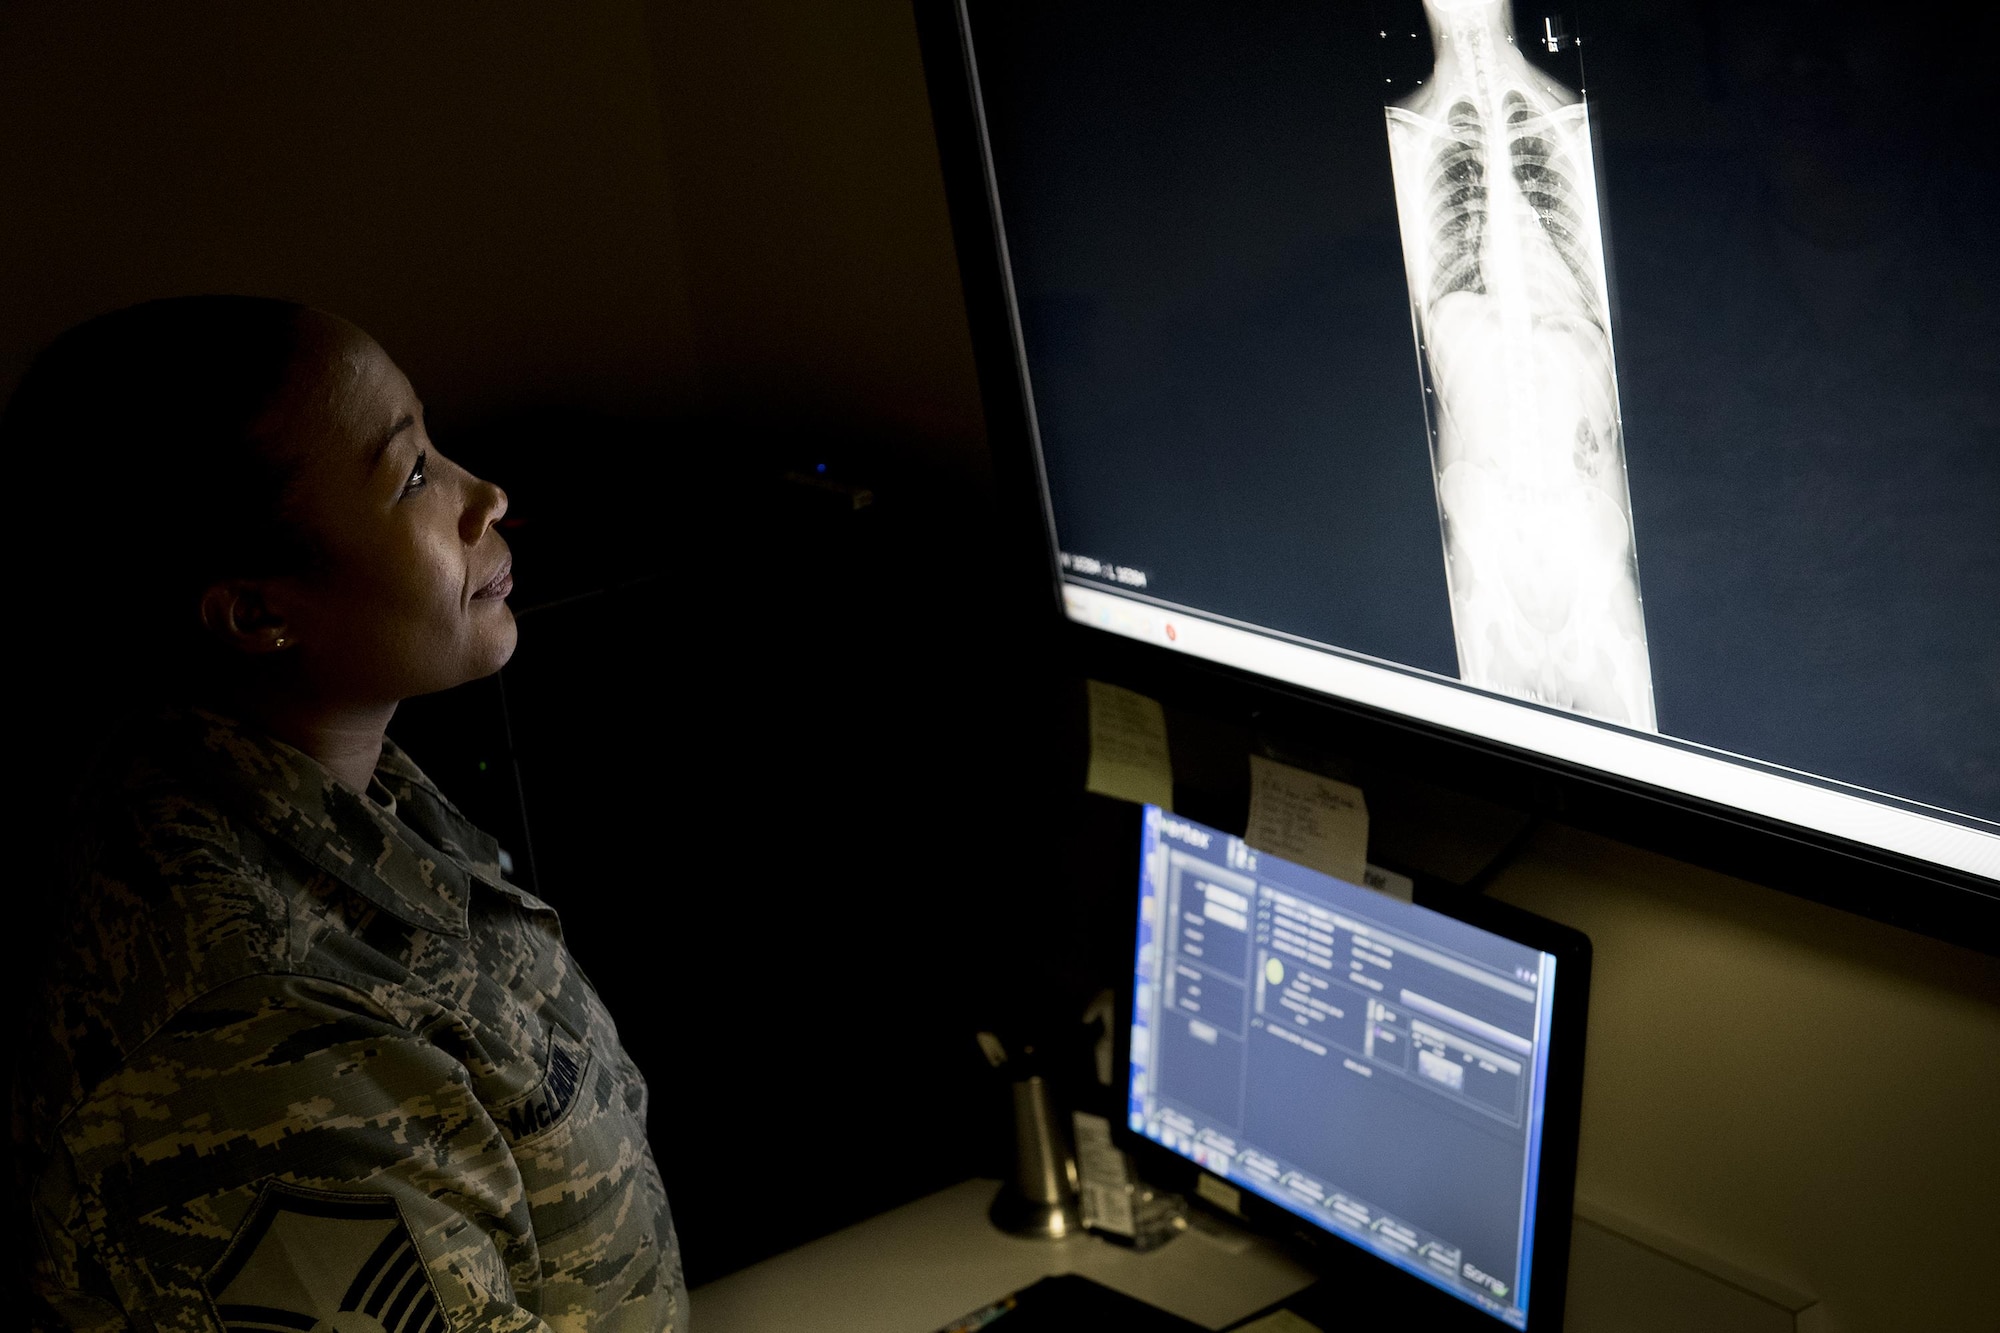 Master Sgt. Tracey McLendon, 23d Medical Support Squadron flight chief of diagnostic imaging, reads an X-ray, Oct. 24, 2016, at Moody Air Force Base, Ga. A simple broken bone could potentially become deadly if bone fragments damage organs. When the radiology section reviews their X-rays, they search for any abnormalities. (U.S. Air Force photo by Airman 1st Class Daniel Snider)
